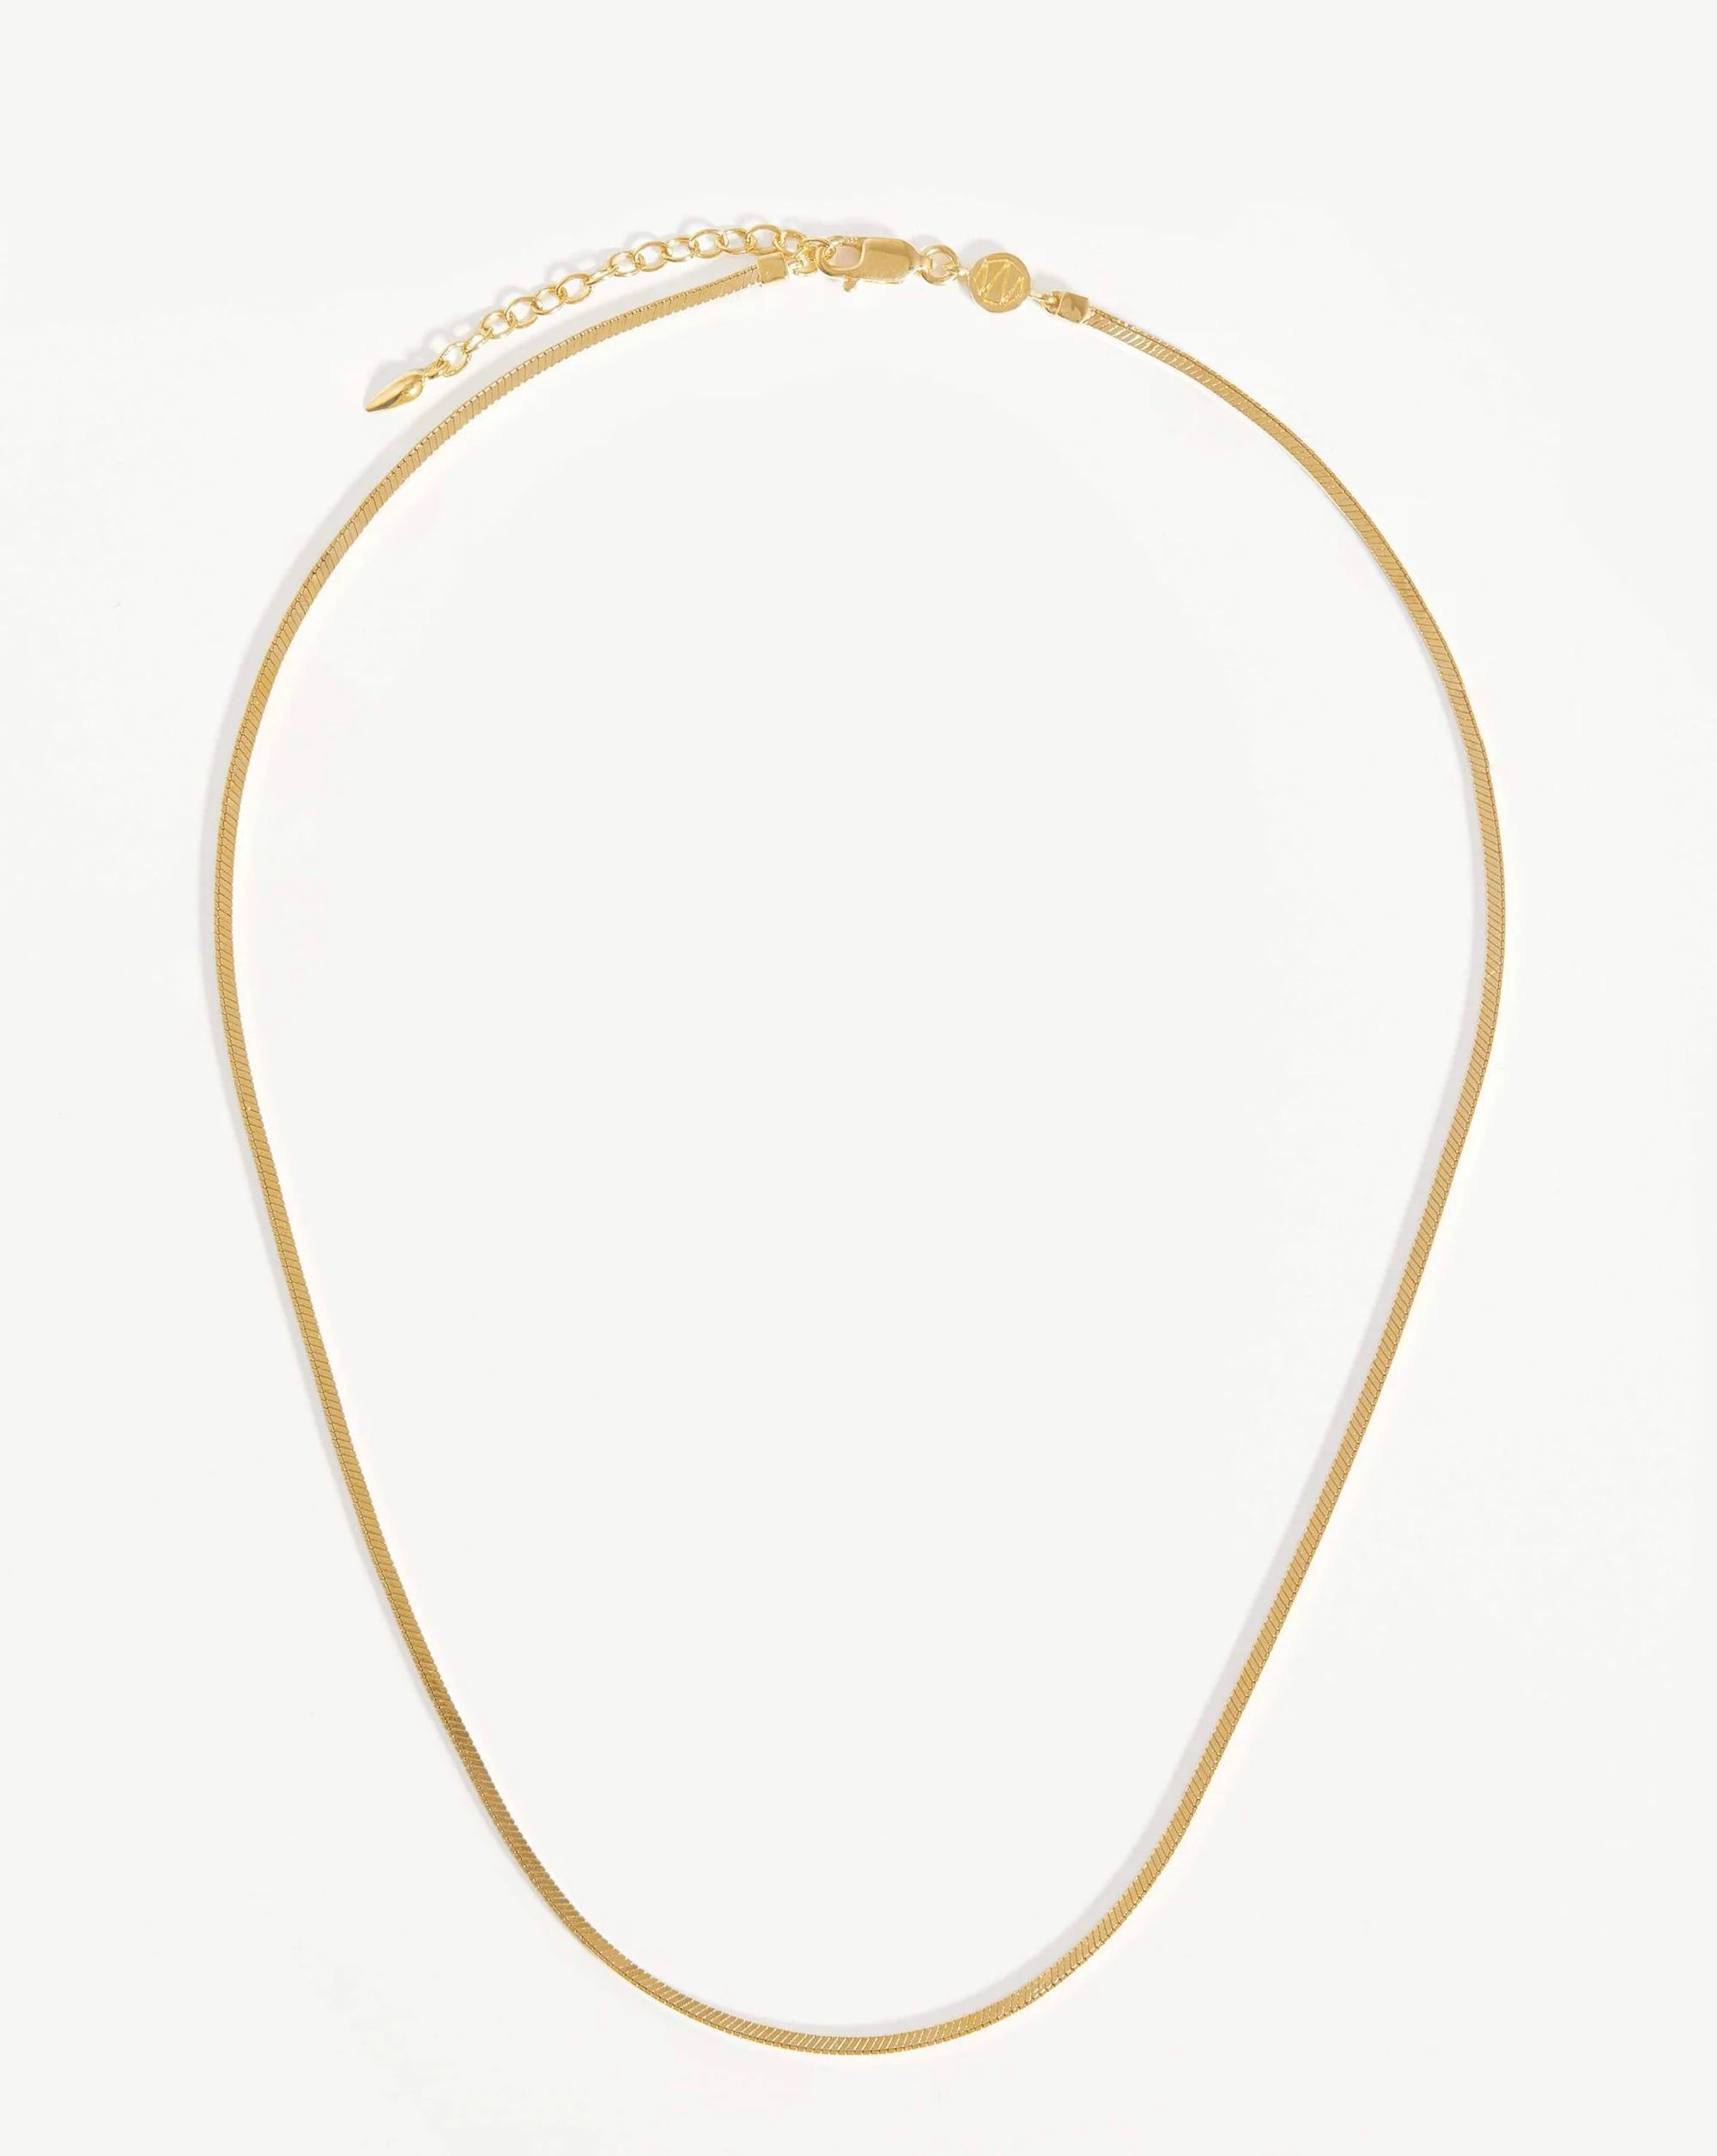 Lucy Williams Square Snake Chain Necklace | Missoma